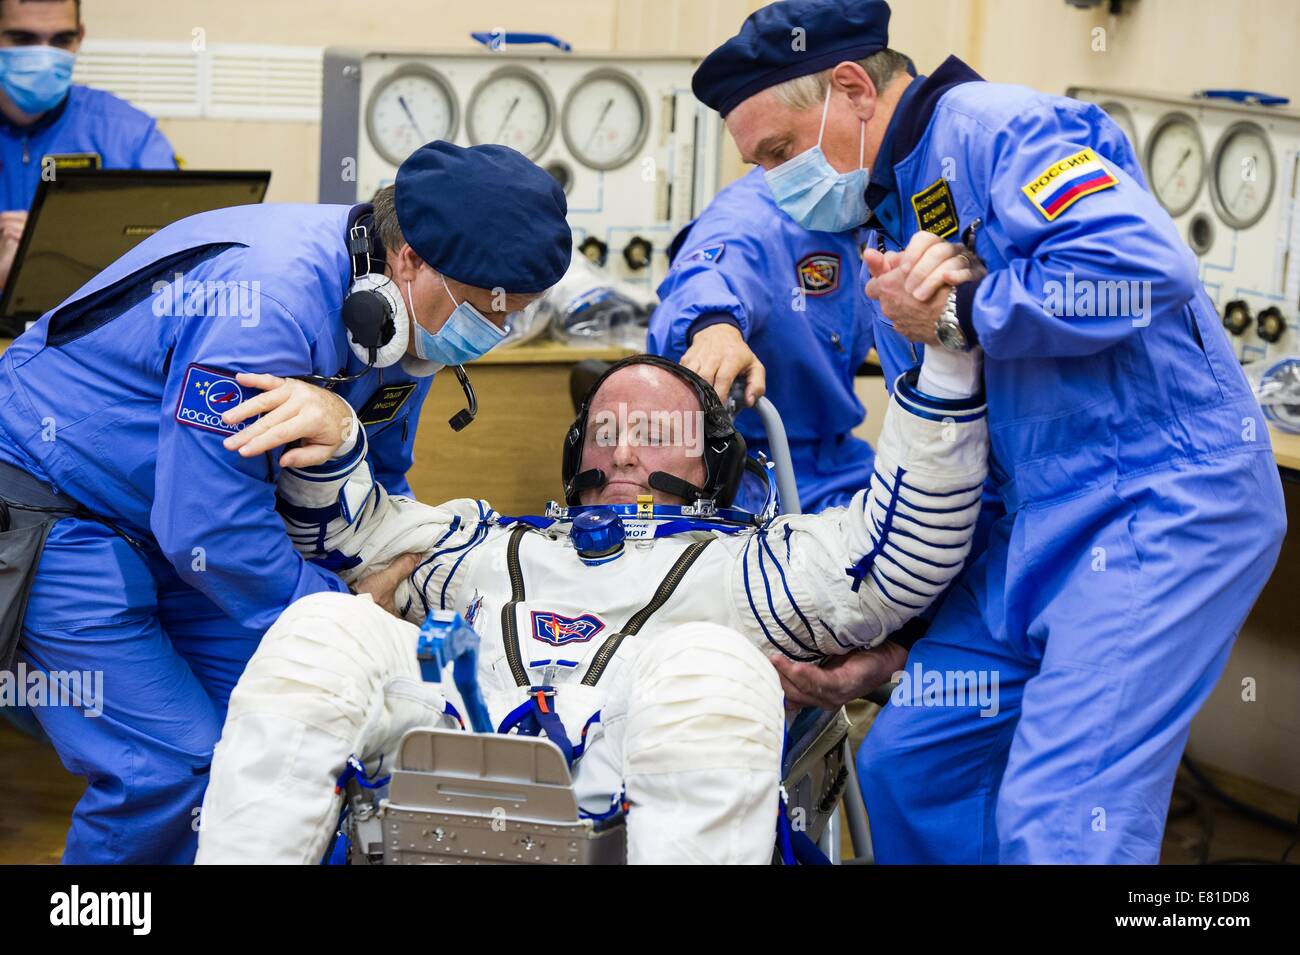 International Space Station Expedition 41 astronaut Barry Wilmore of NASA is helped up after completing the pressure check on his Russian Sokol space suit in preparation for launch aboard the Soyuz TMA-14M spacecraft to the International Space Station September 25, 2014 in Baikonur, Kazakhstan. Samokutyaev, Serova and Wilmore will spend the next five and a half months living and working aboard the ISS. Stock Photo